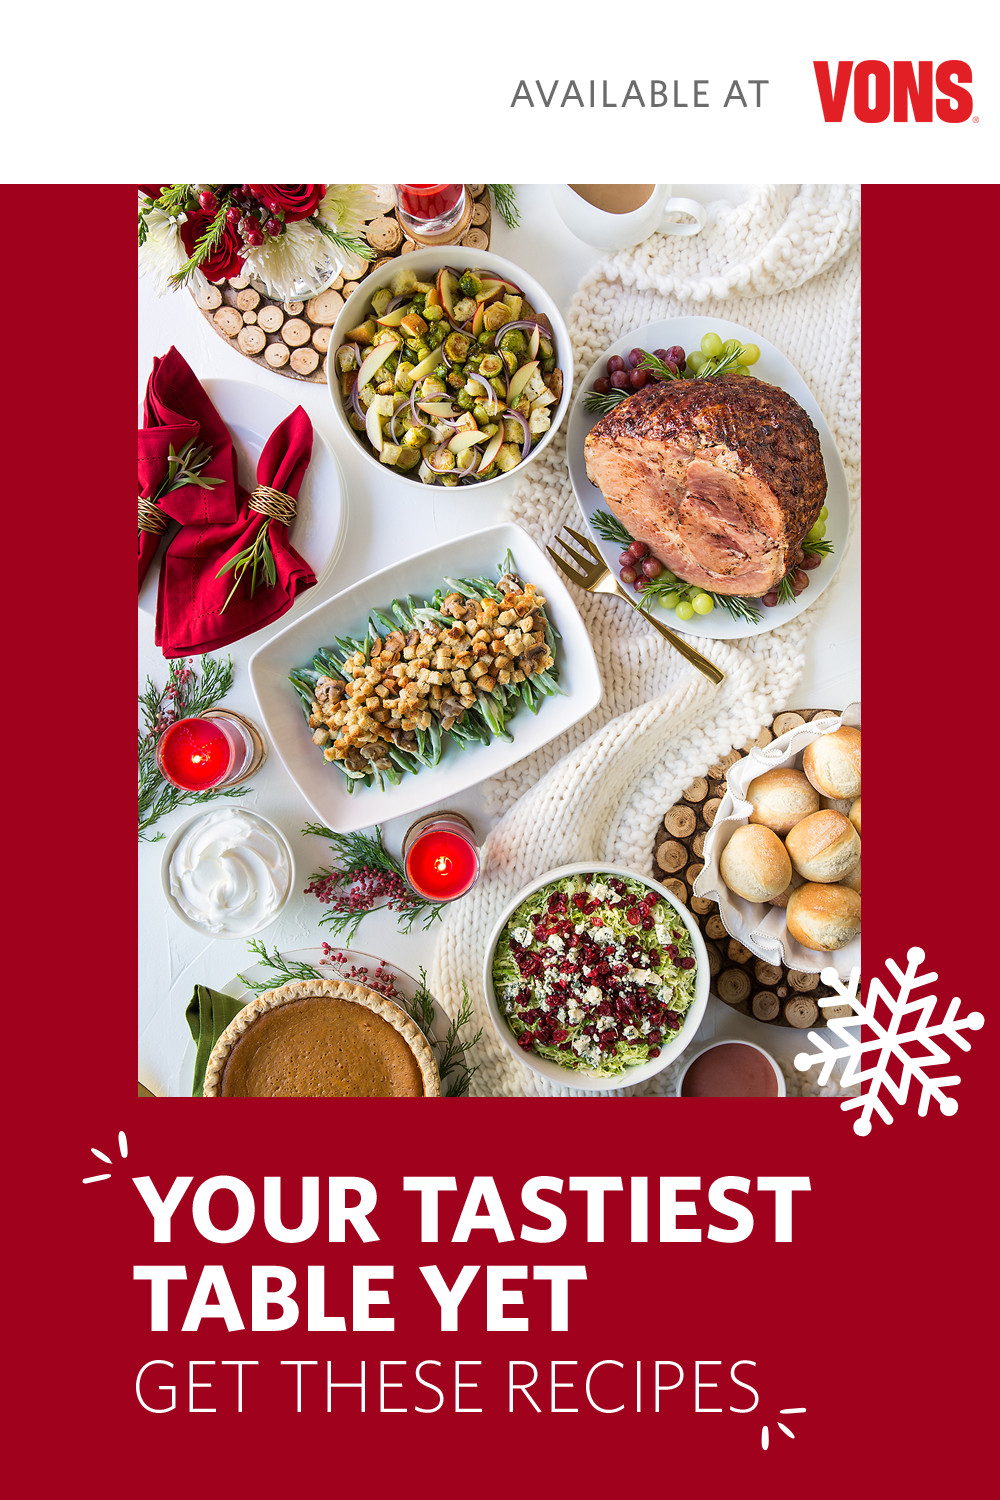 Vons Holiday Dinners
 Setting the perfect holiday table is made super simple at